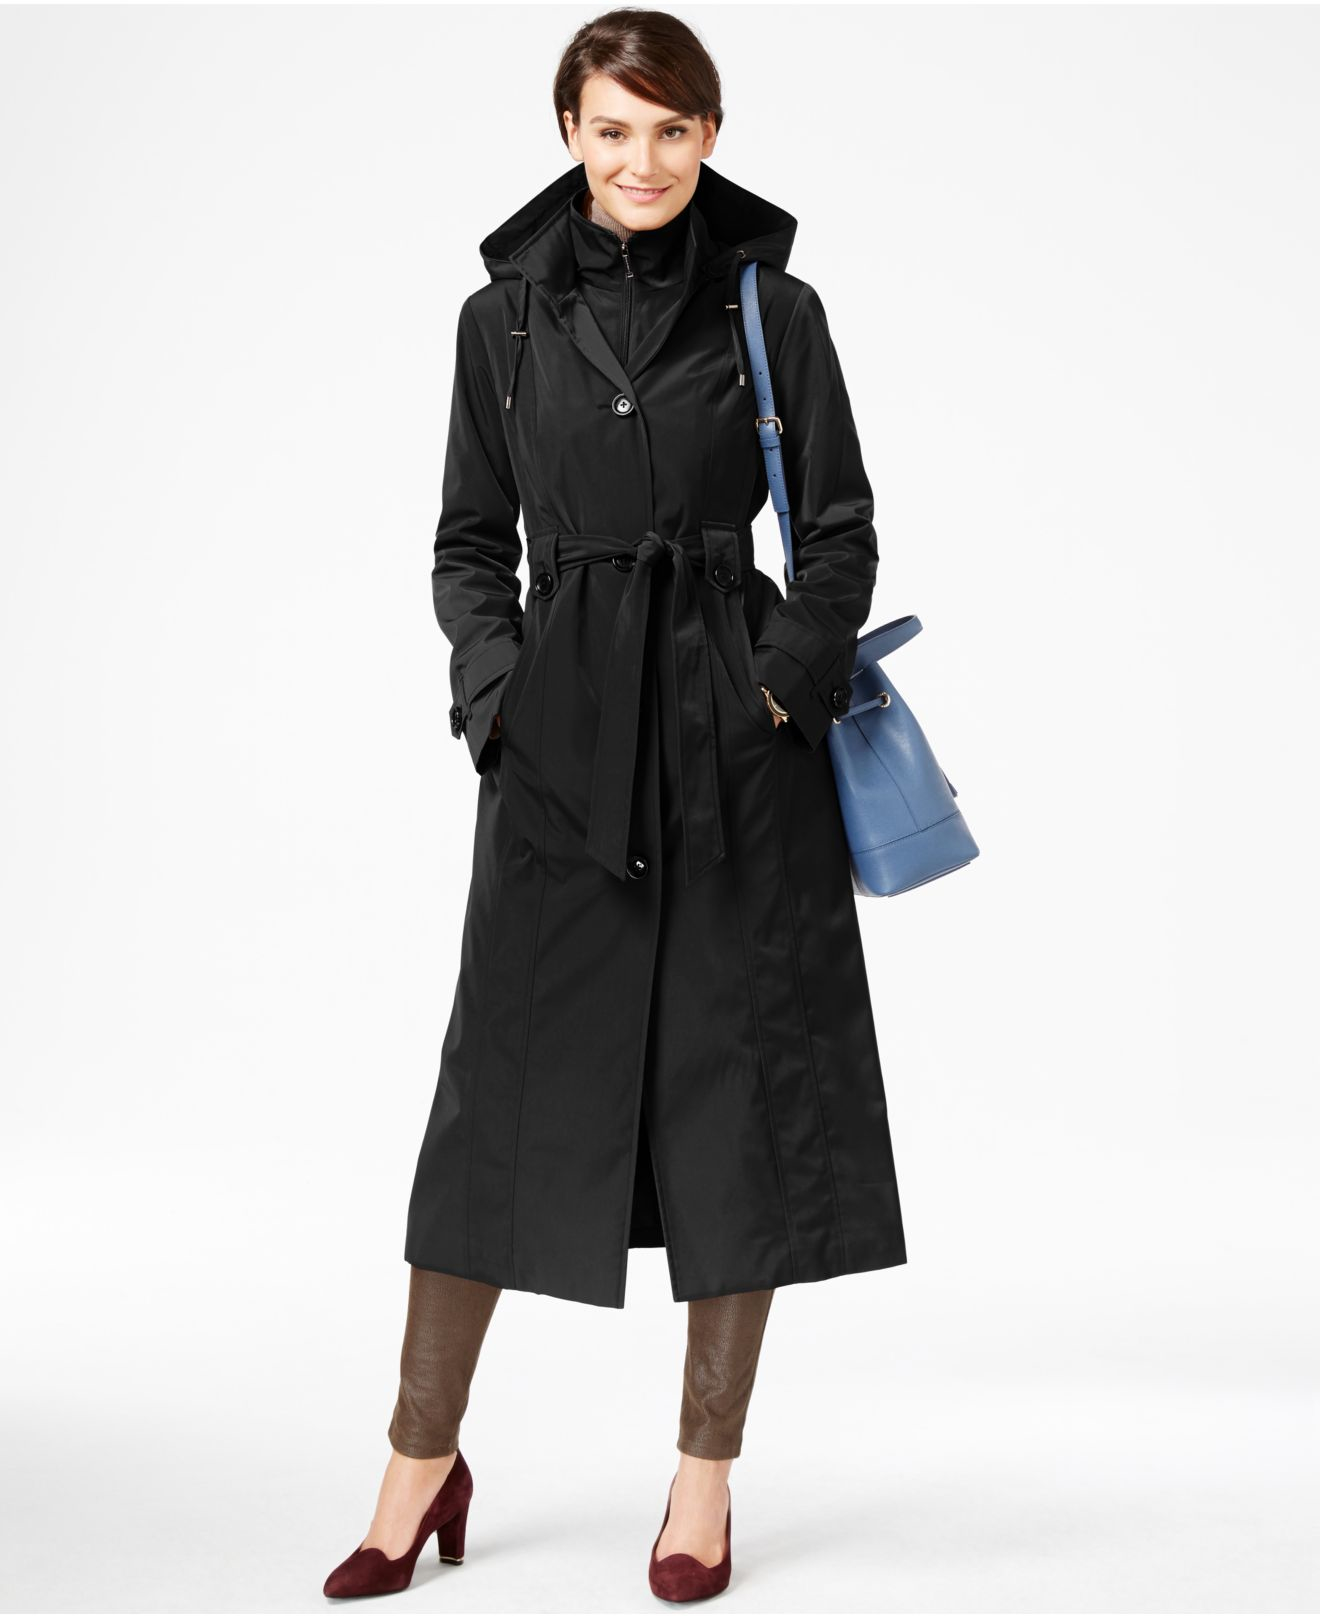 London Fog Layered Maxi Trench Coat in Black - Lyst